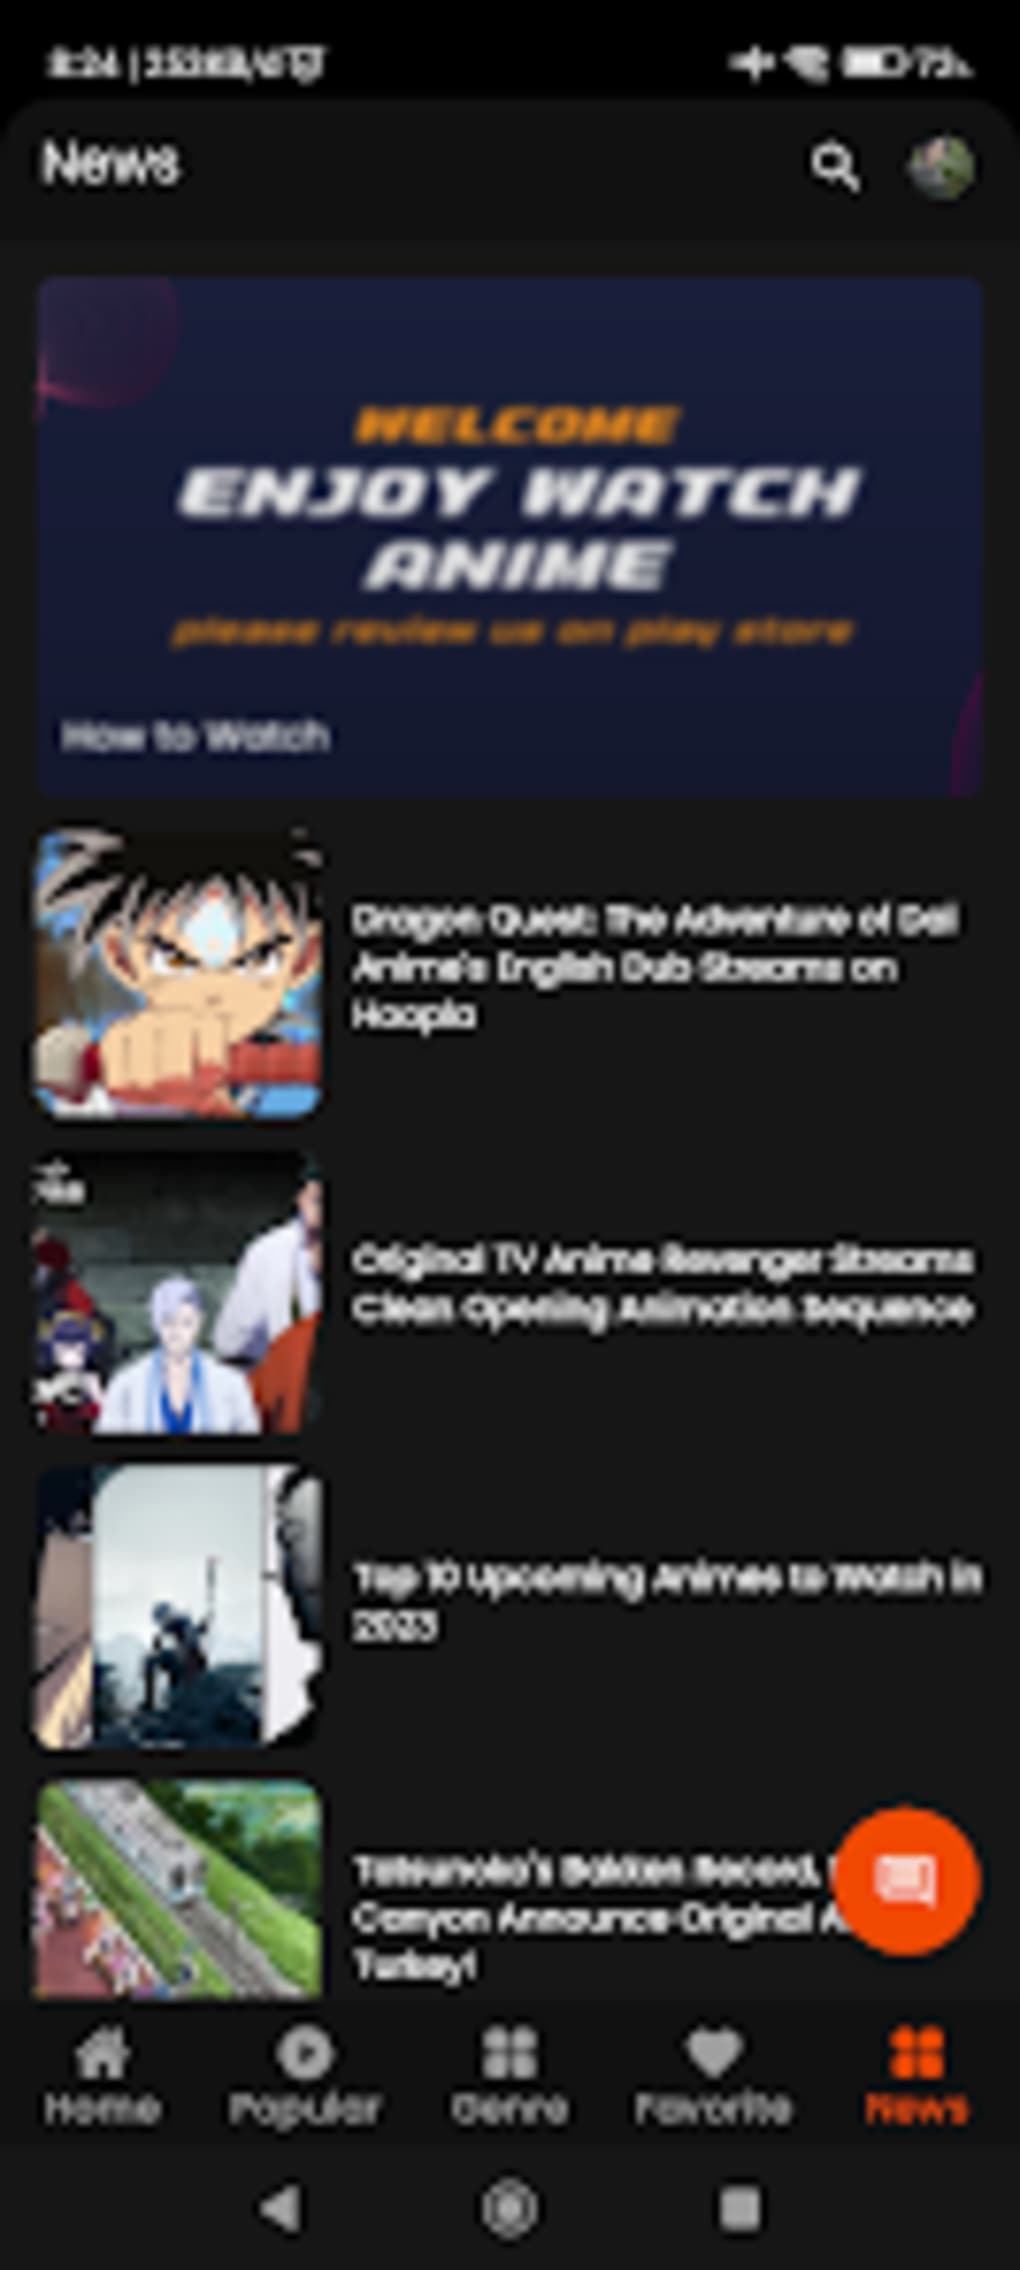 How to Watch FREE Anime  Best FREE Anime APP  SITE for iOS  Android in  2020  HD  UPDATED  YouTube